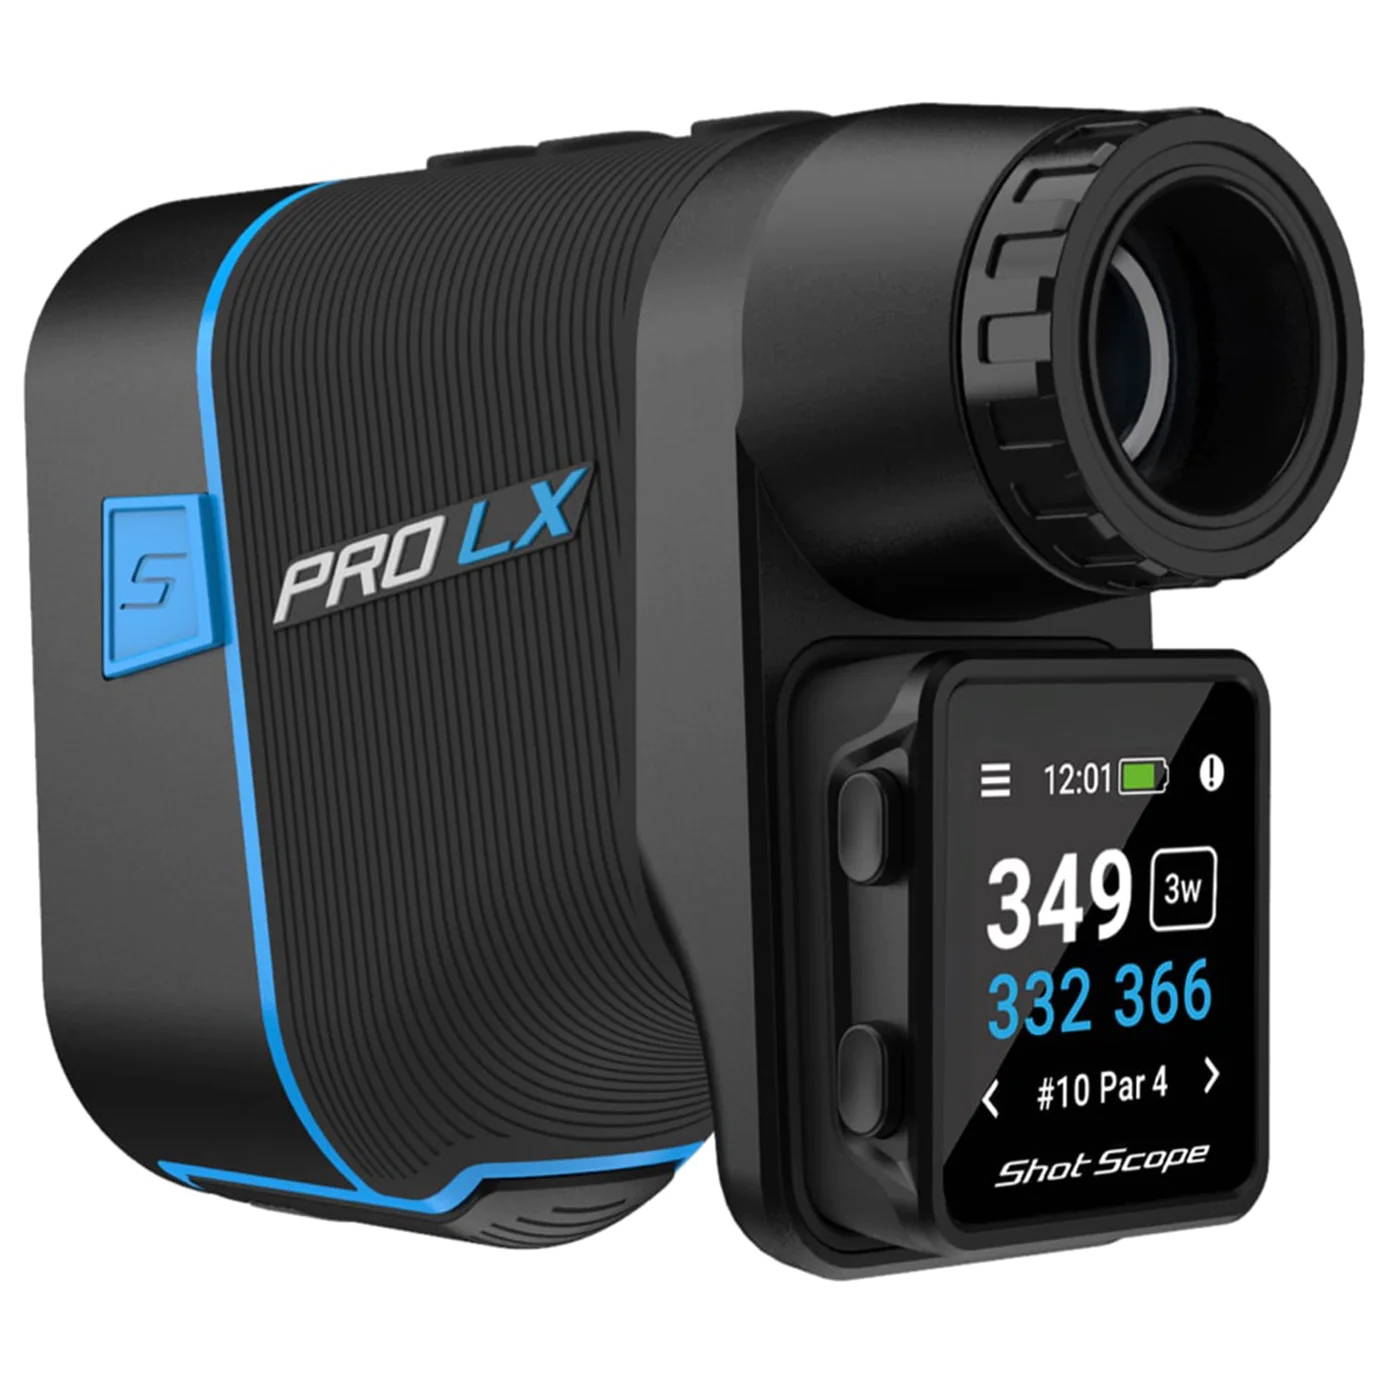 A black and blue Shot Scope Pro LX+ golf laser rangefinder with attachable GPS unit